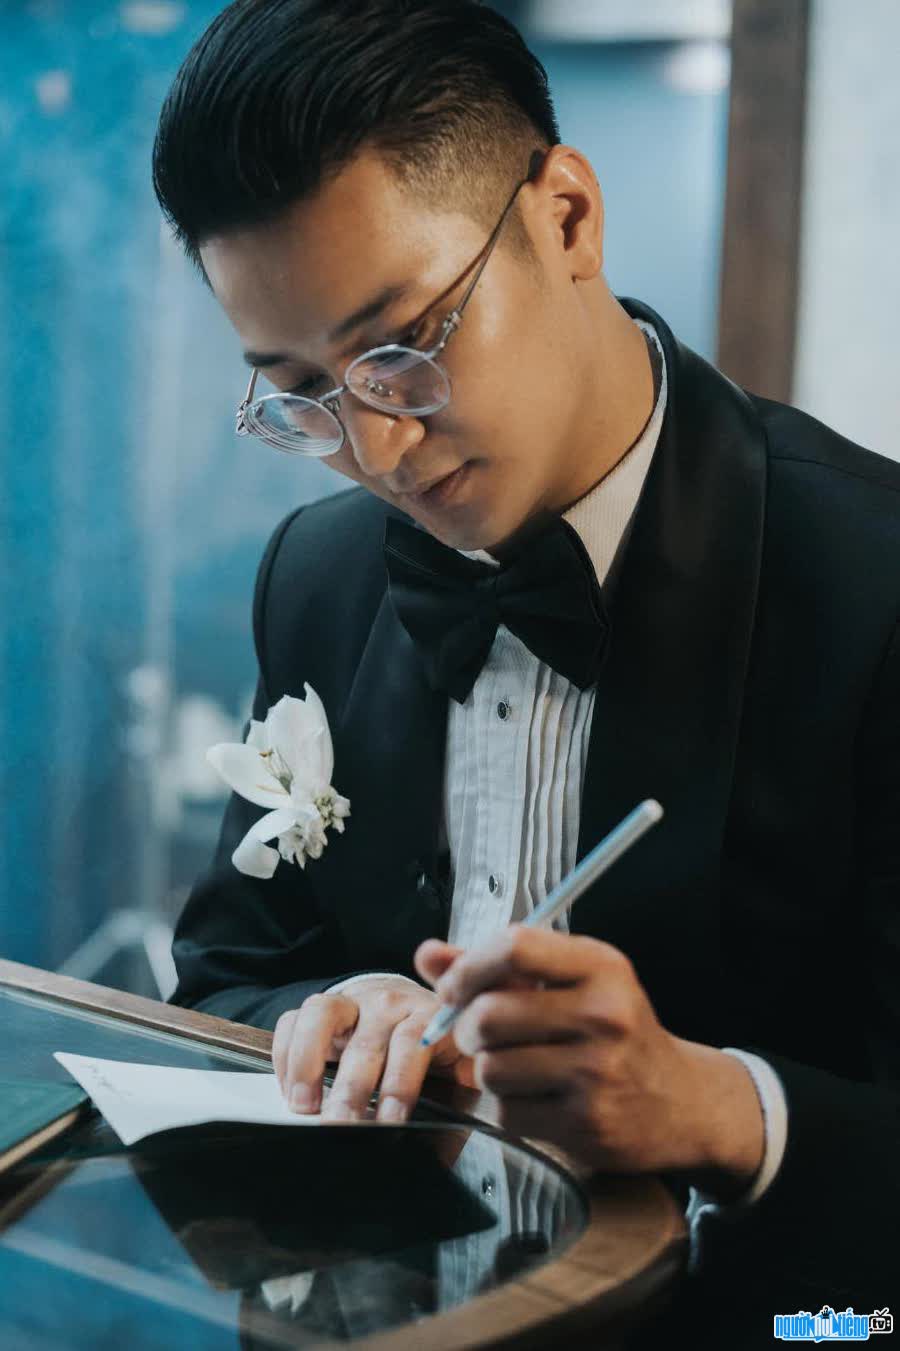 A photo of actor Vuong Trong Tri elegantly wearing a suit